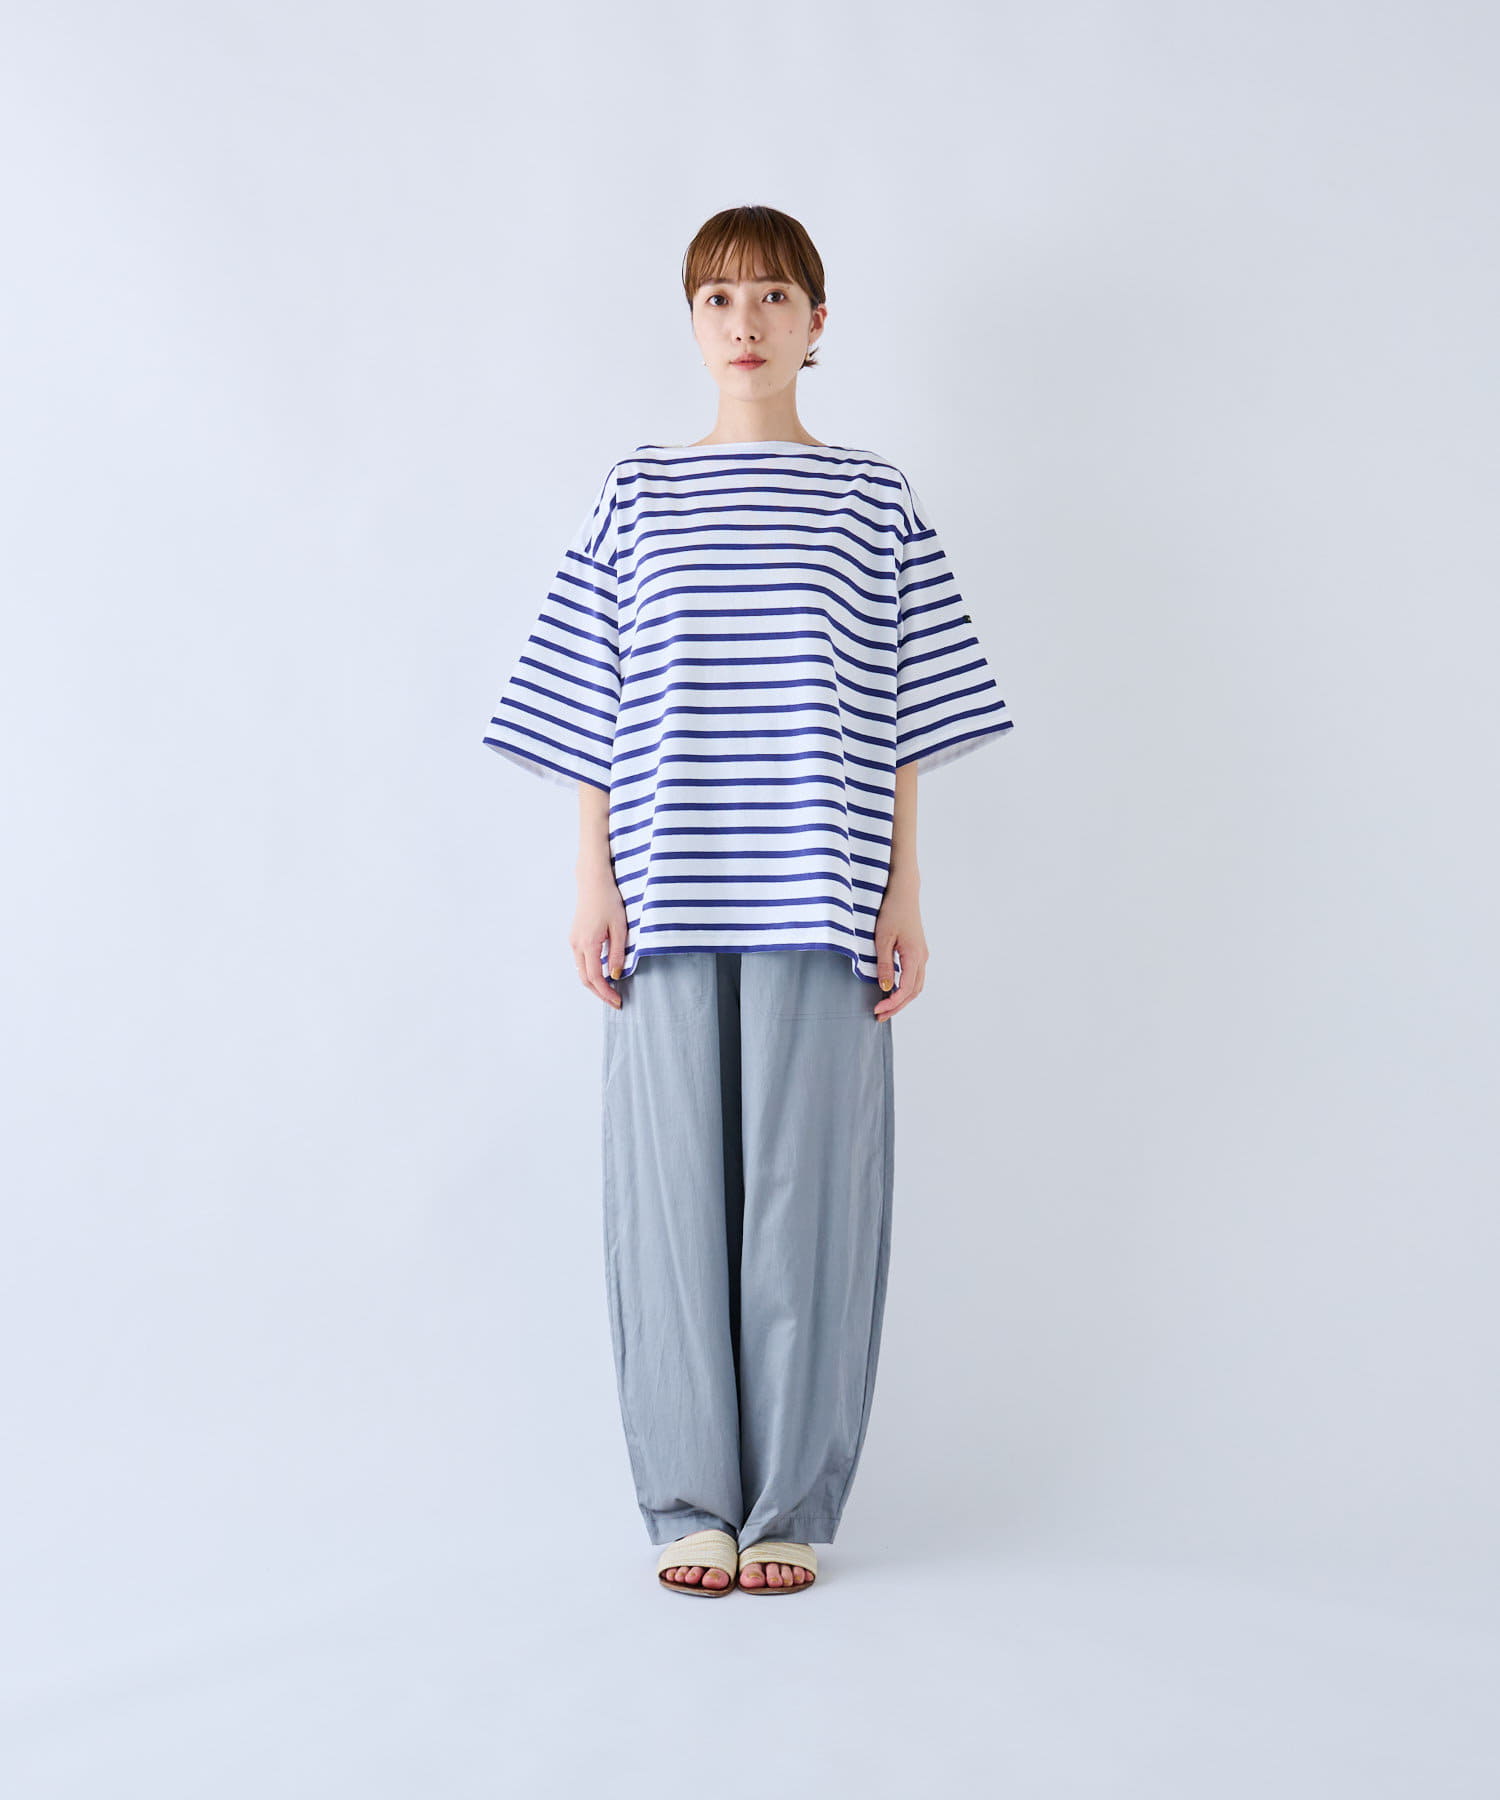 OUTIL TRICOT AAST - COTTON TERRY バスクシャツ